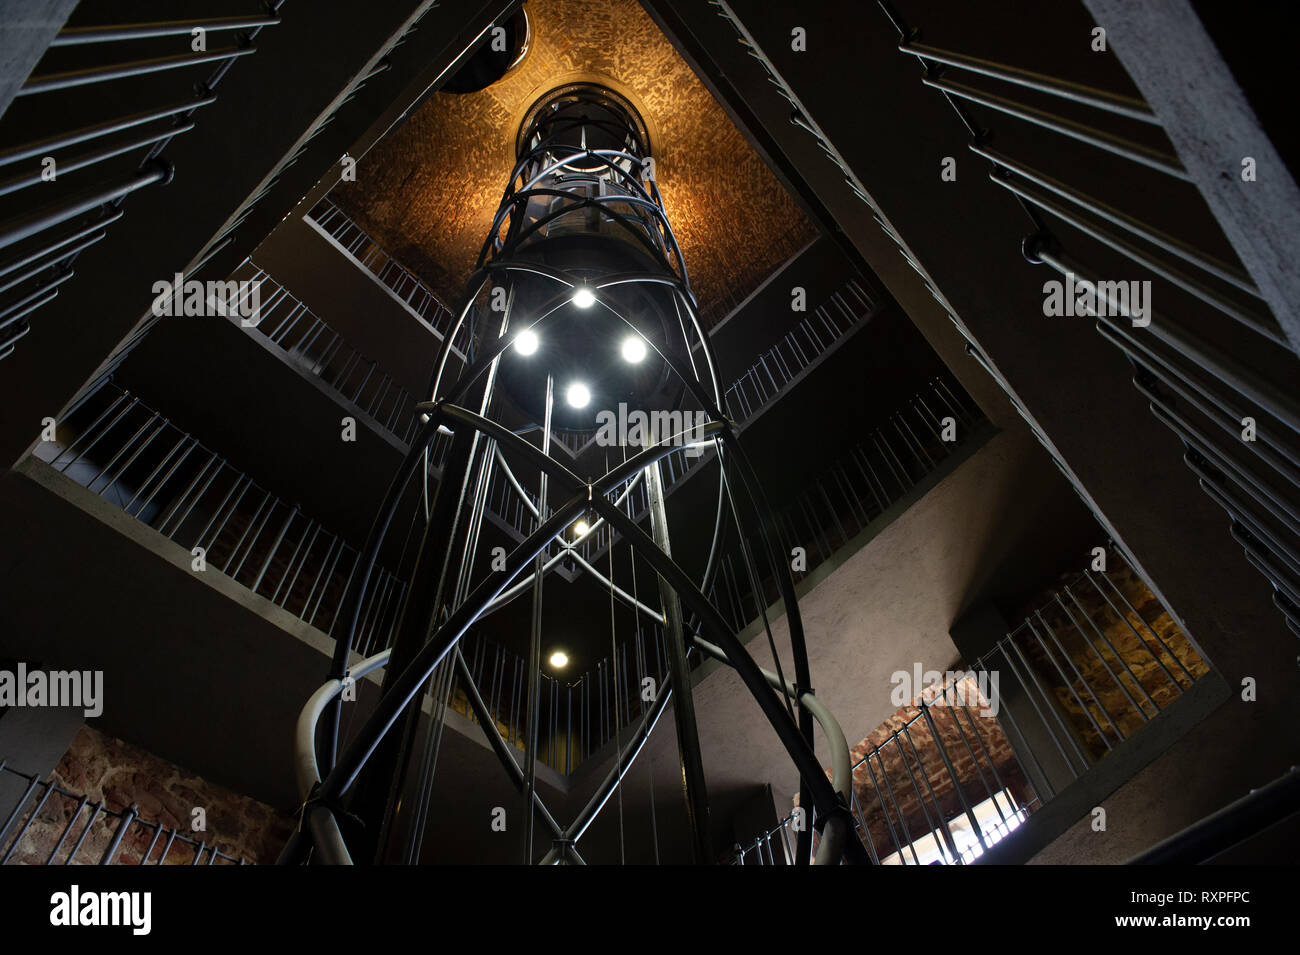 The new elevator and modern architecture inside the Old Town Hall Tower, Prague (Praha), Czech Republic Stock Photo